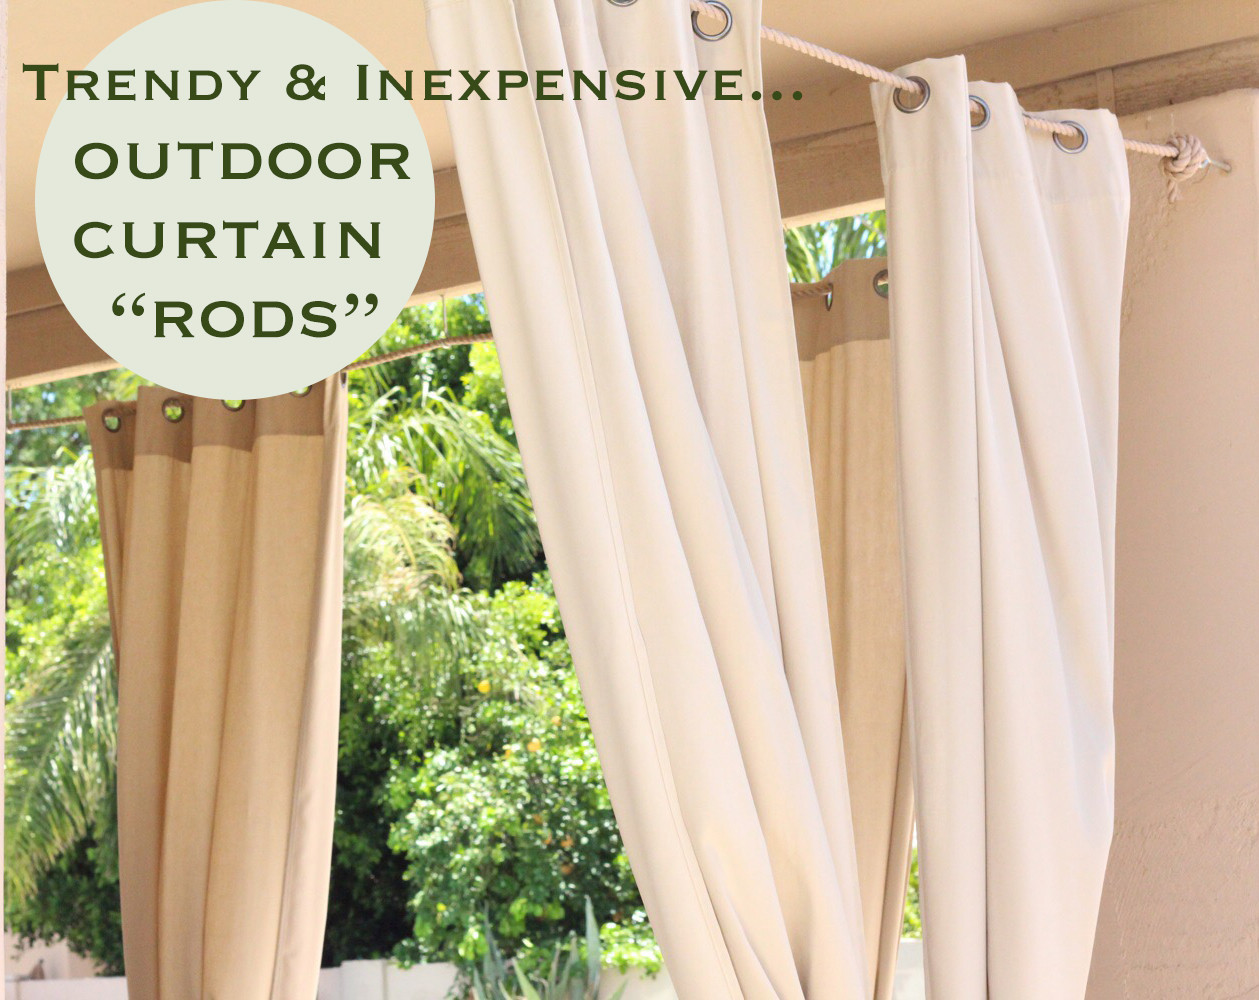 DIY Outdoor Curtain Rods
 Trendy & Inexpensive Outdoor Curtain "Rods" Retro